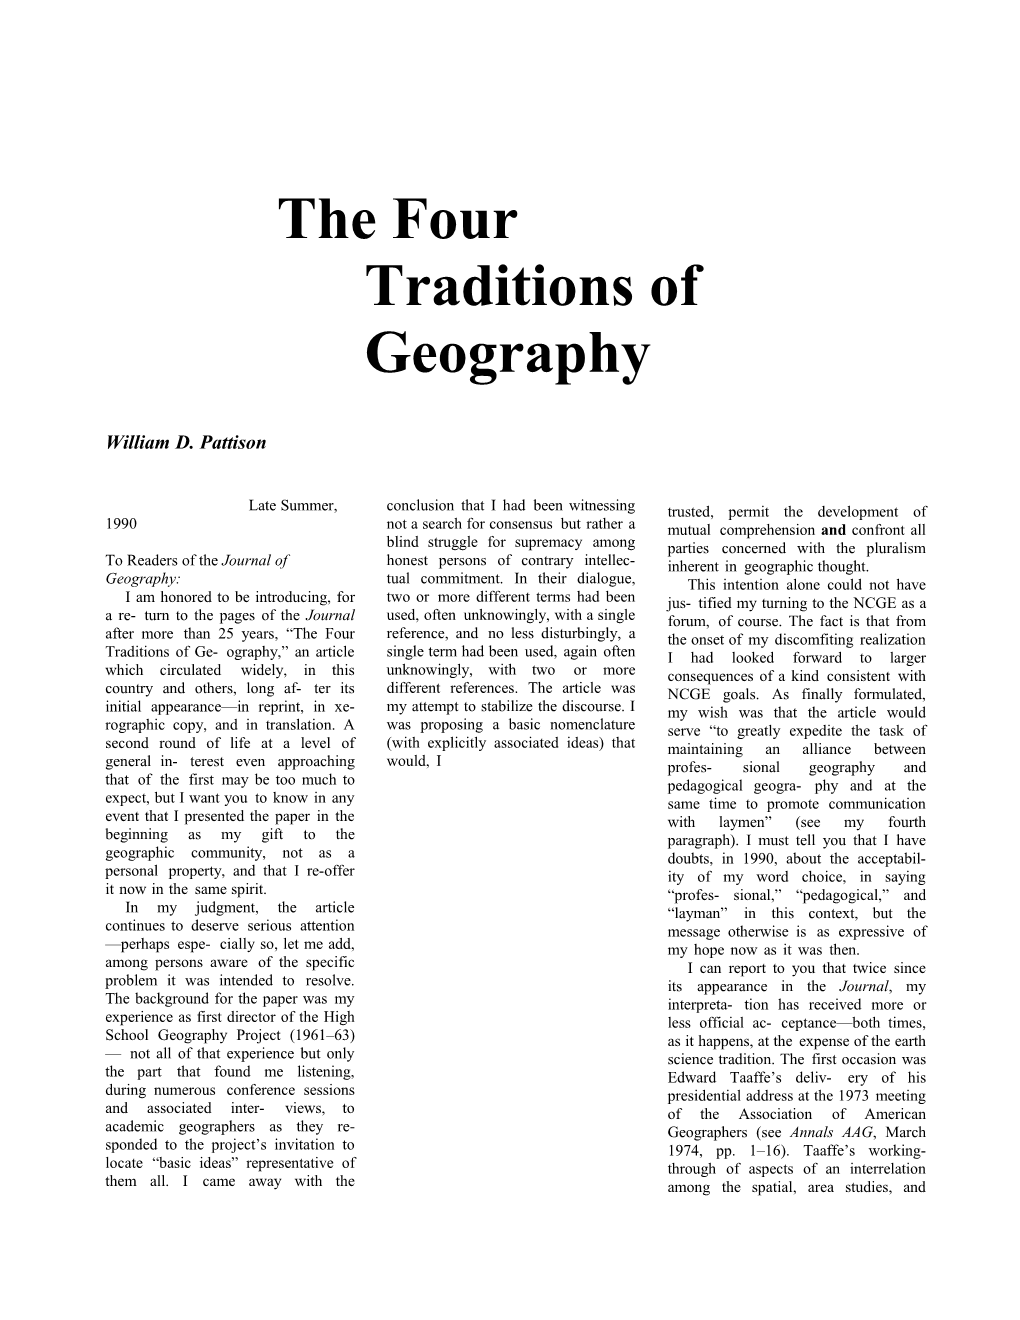 The Four Traditions of Geography